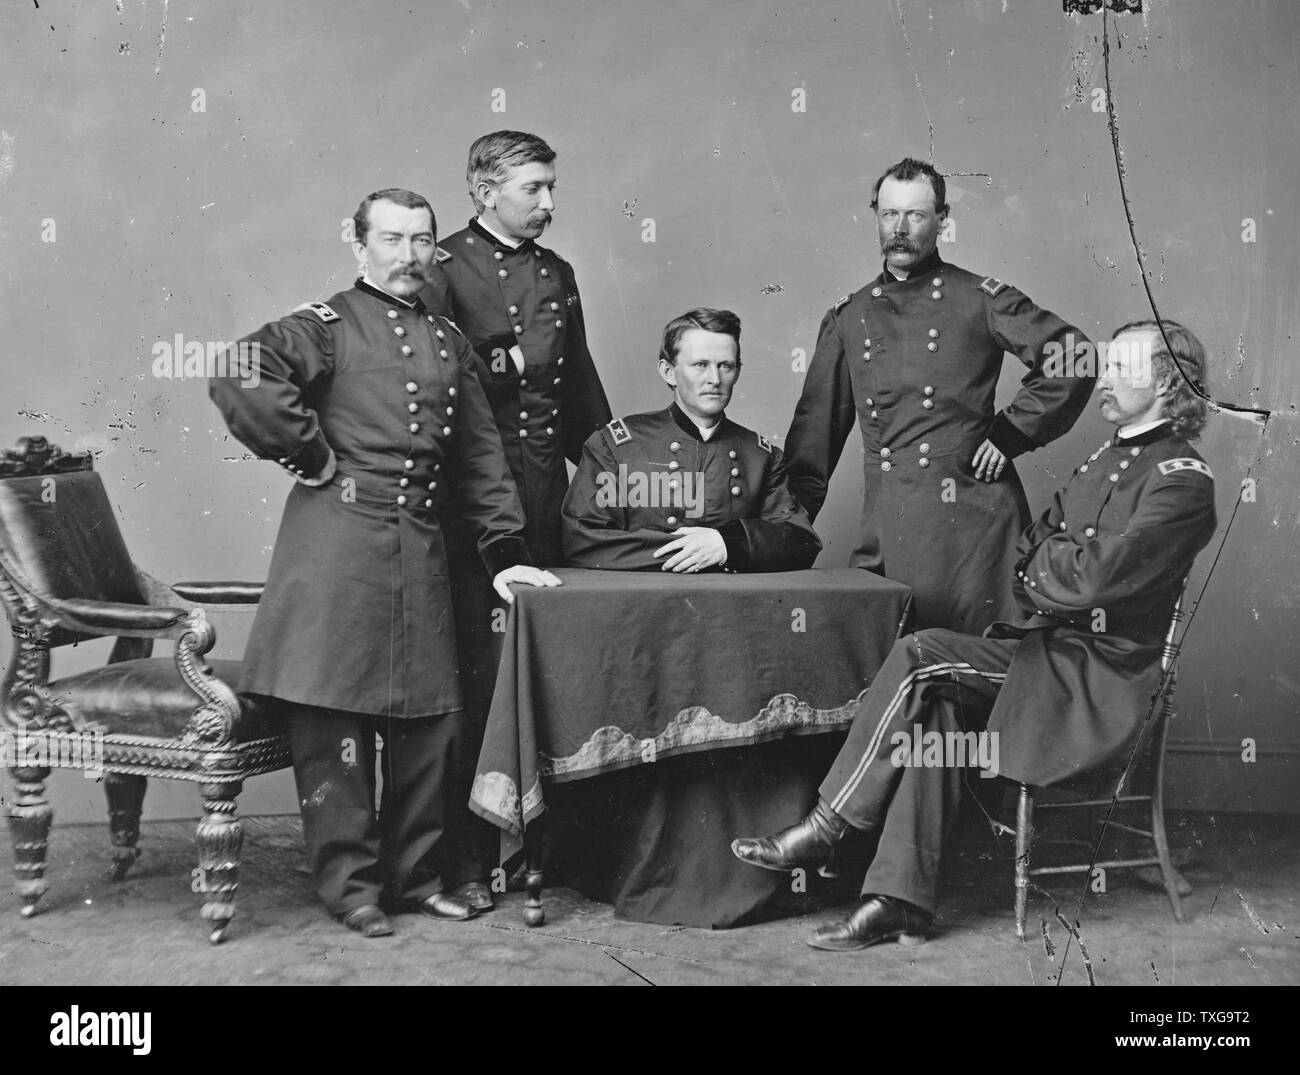 General of the Union Philip Sheridan, standing right, and his Staff officers during the American Civil War 1860-65. Stock Photo